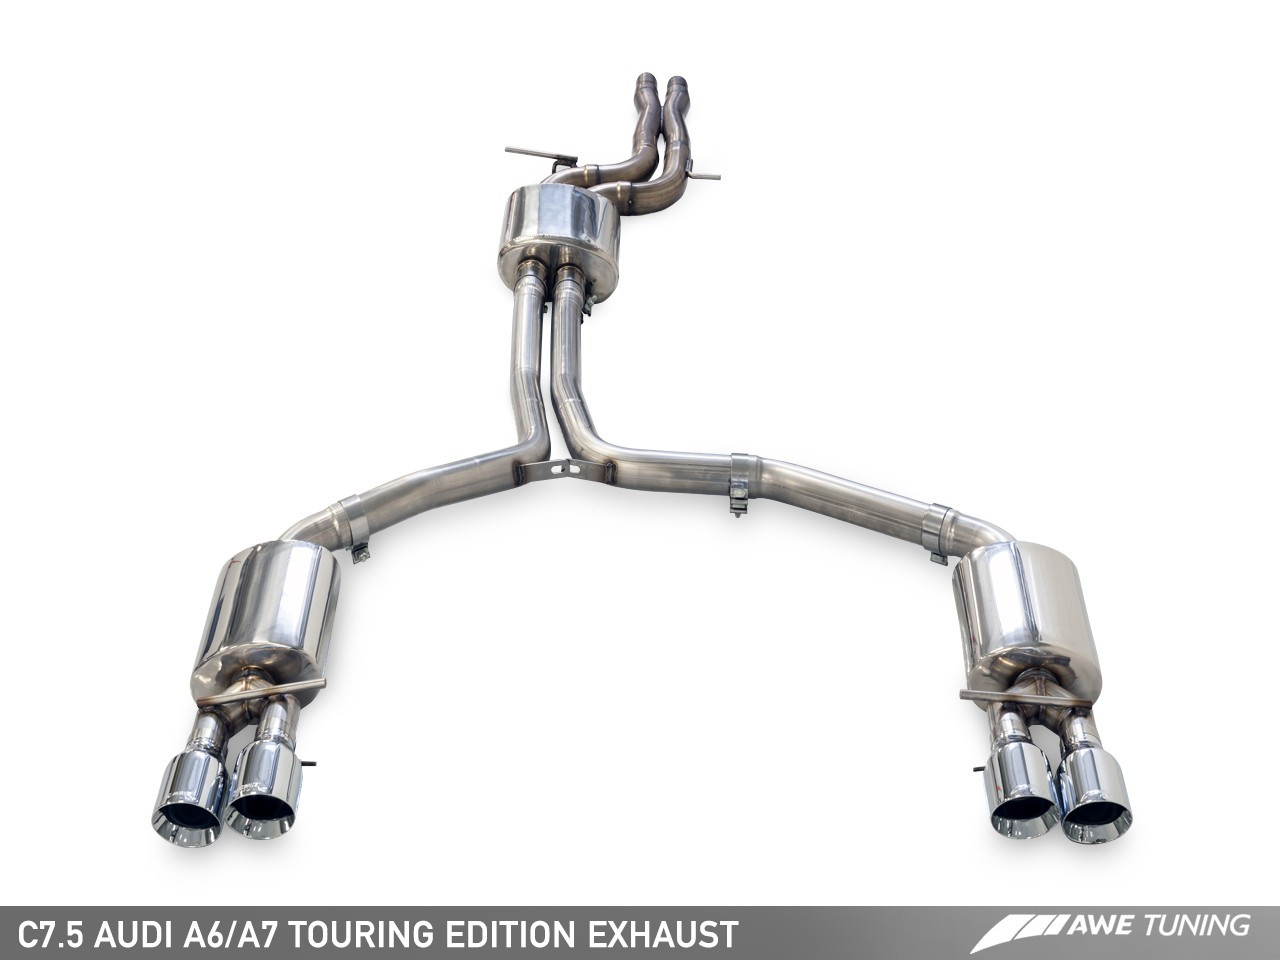 AWE Tuning Audi A7 (C7.5) 3.0TFSI Touring Edition Exhaust System